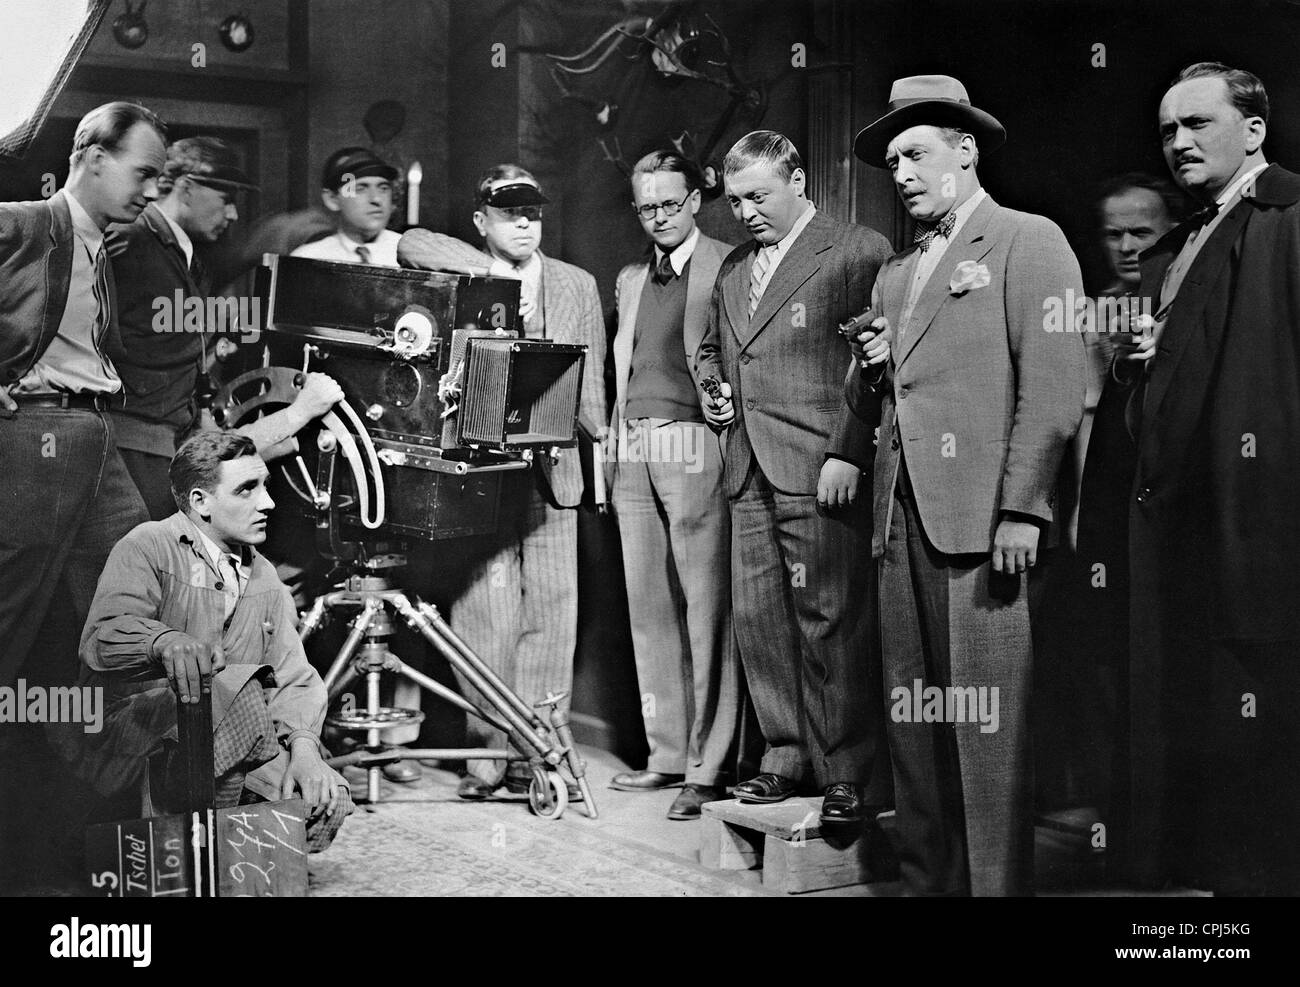 Alfred Zeisler, Guenter Grau, Peter Lorre, Fritz Odemar and Theodor Loos during filming, 1932 Stock Photo